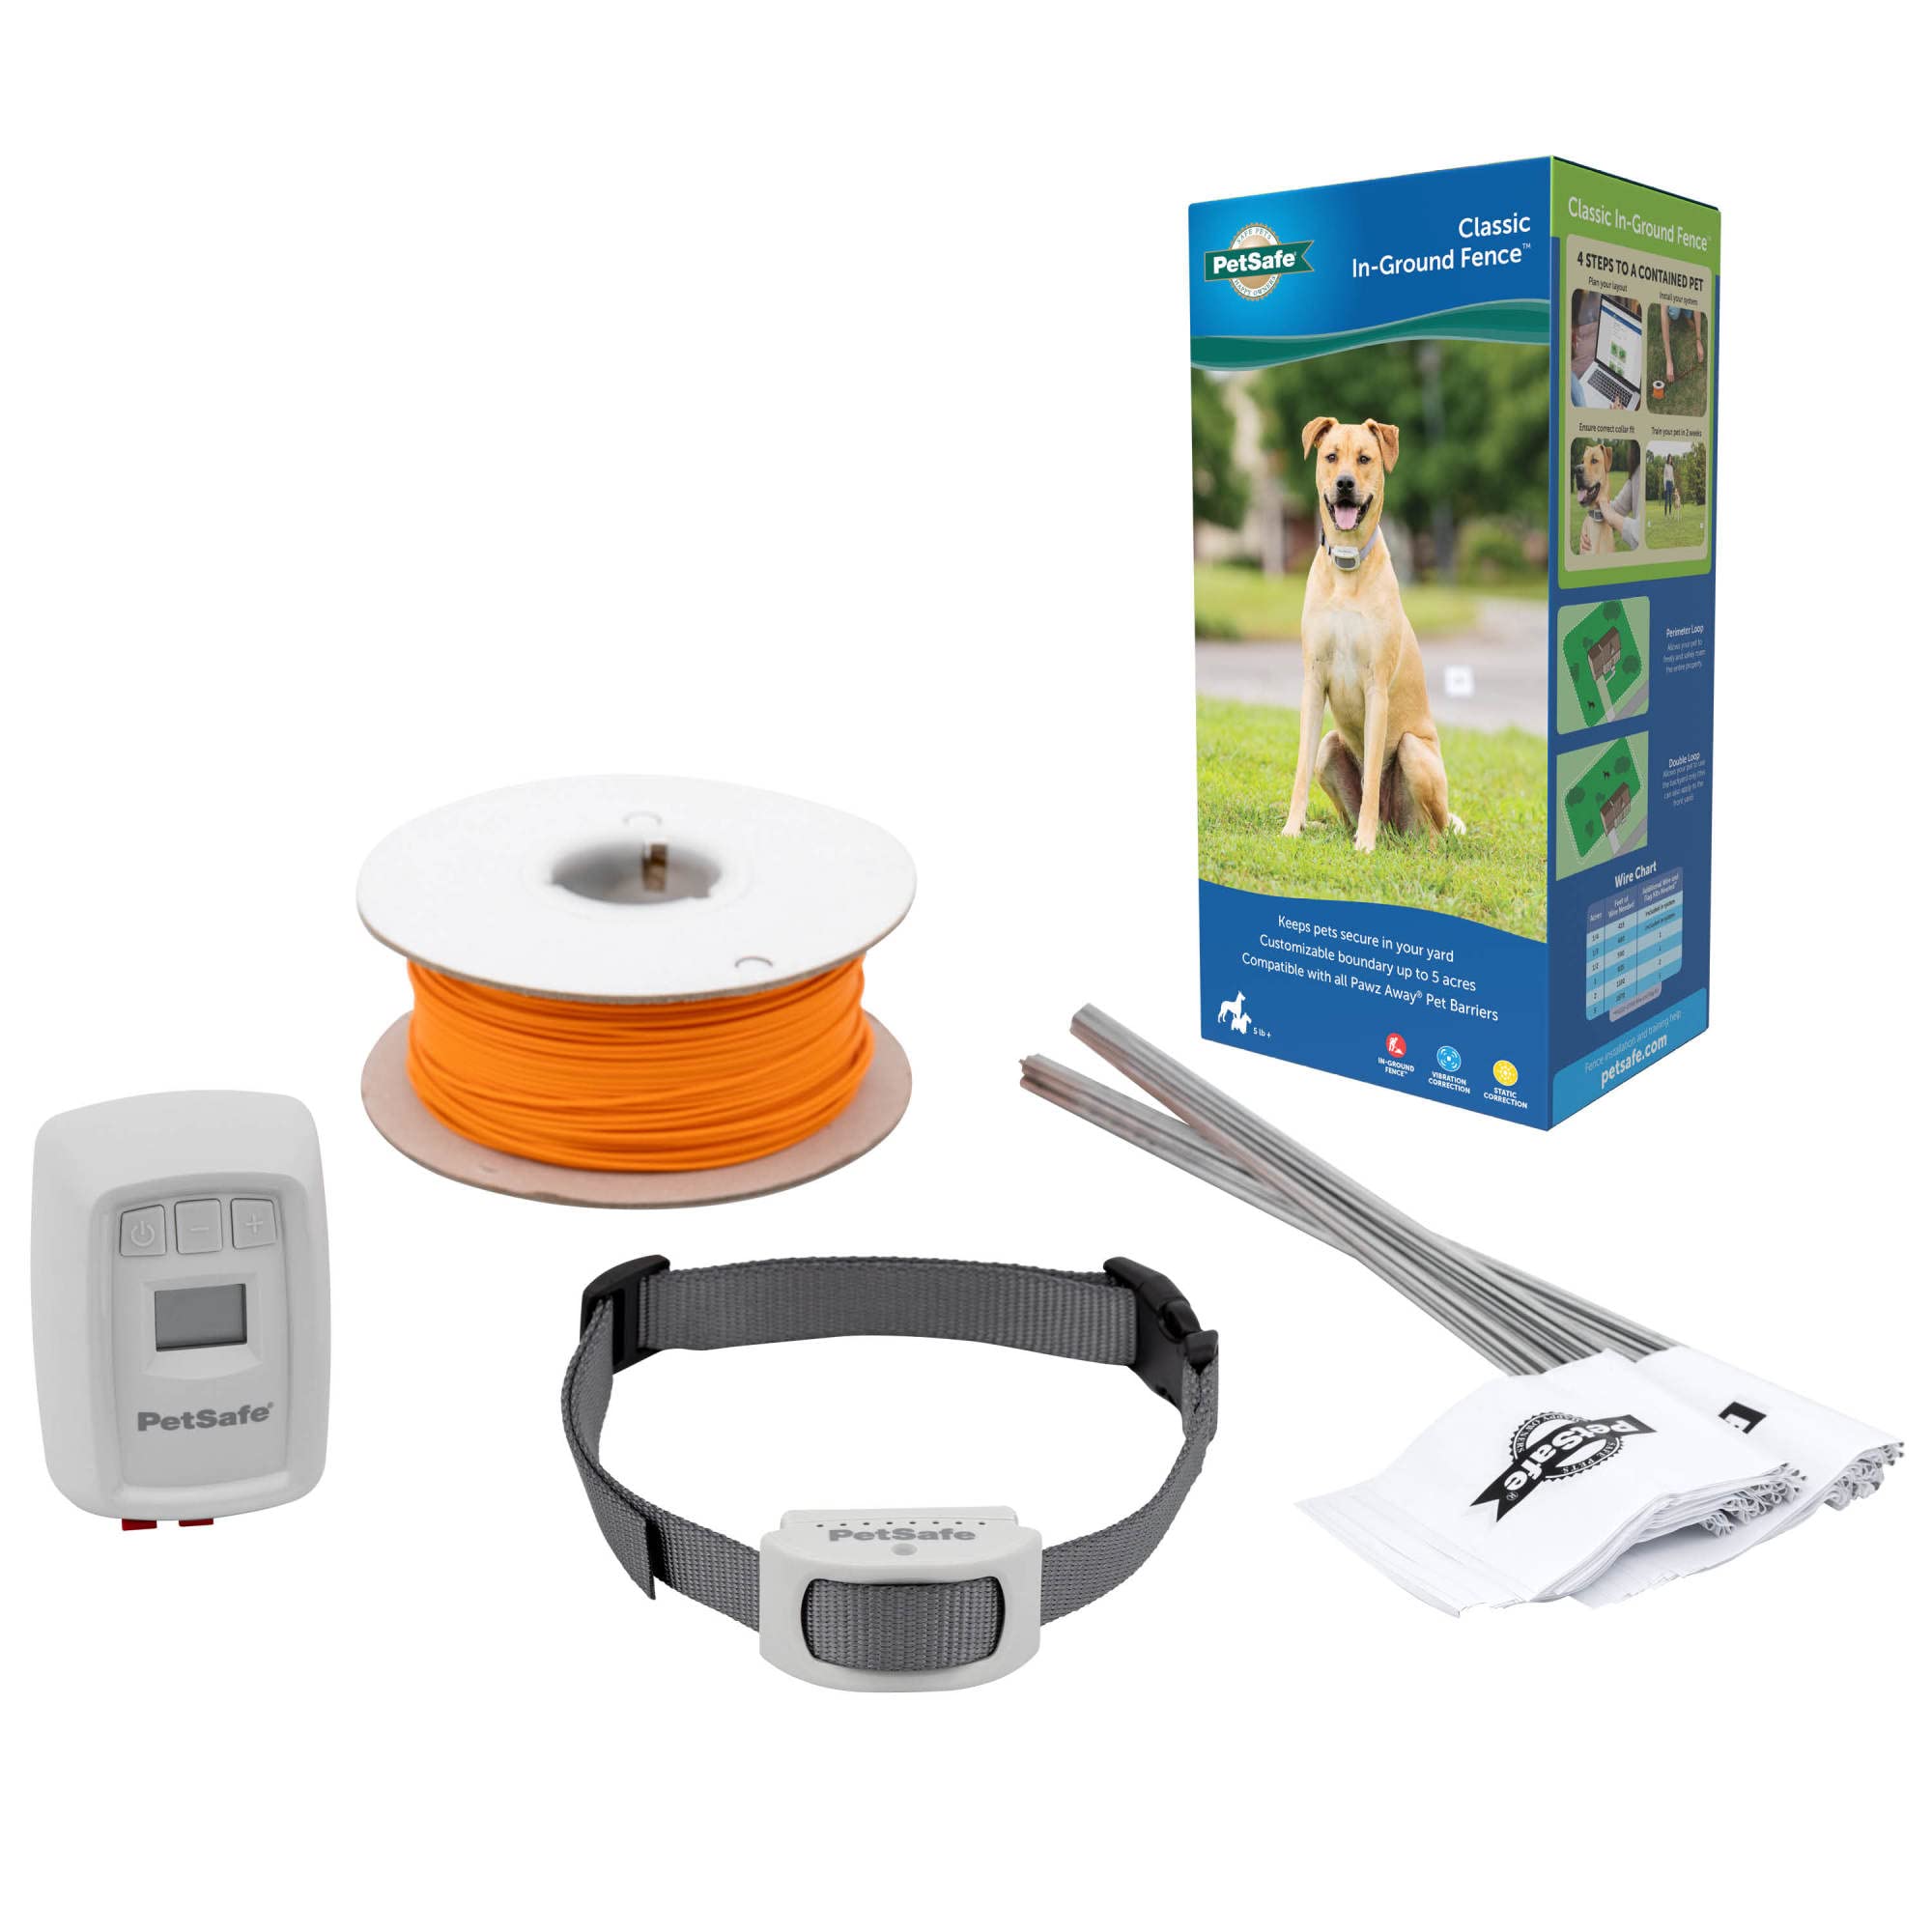 PetSafeClassic In-Ground Fence for Dogs and Cats - from The Parent